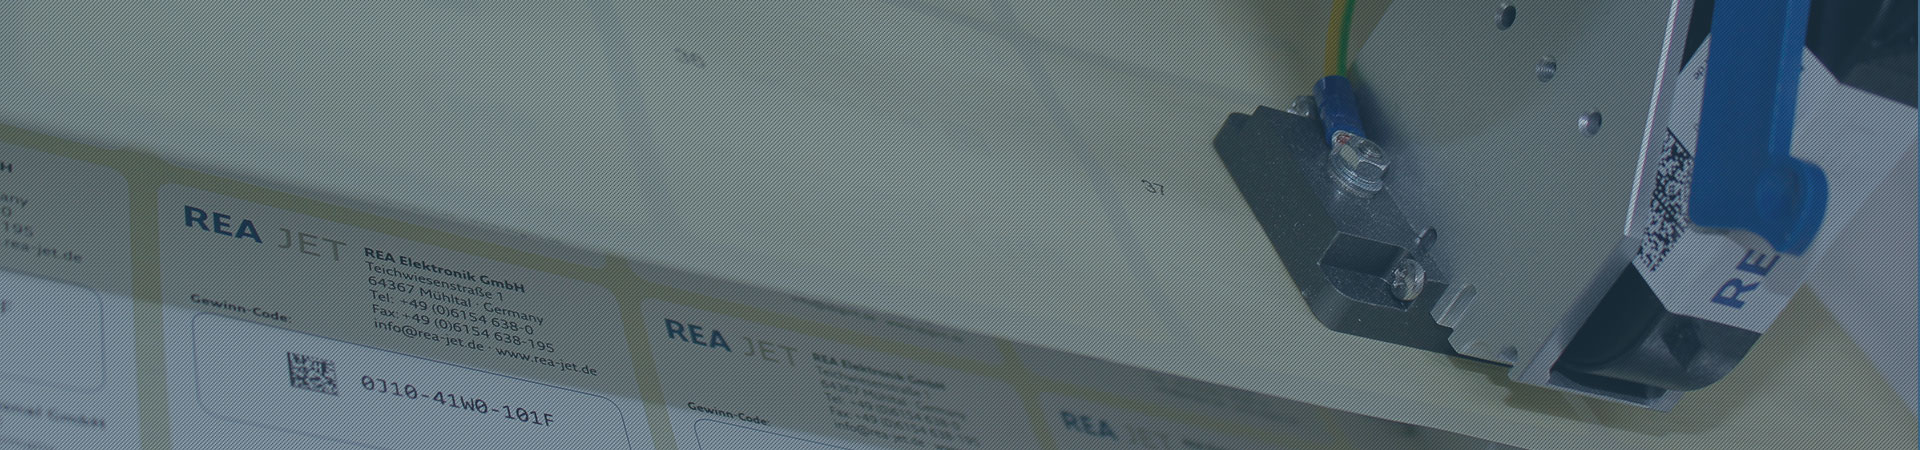 Coding and marking solutions for your applications - REA JET